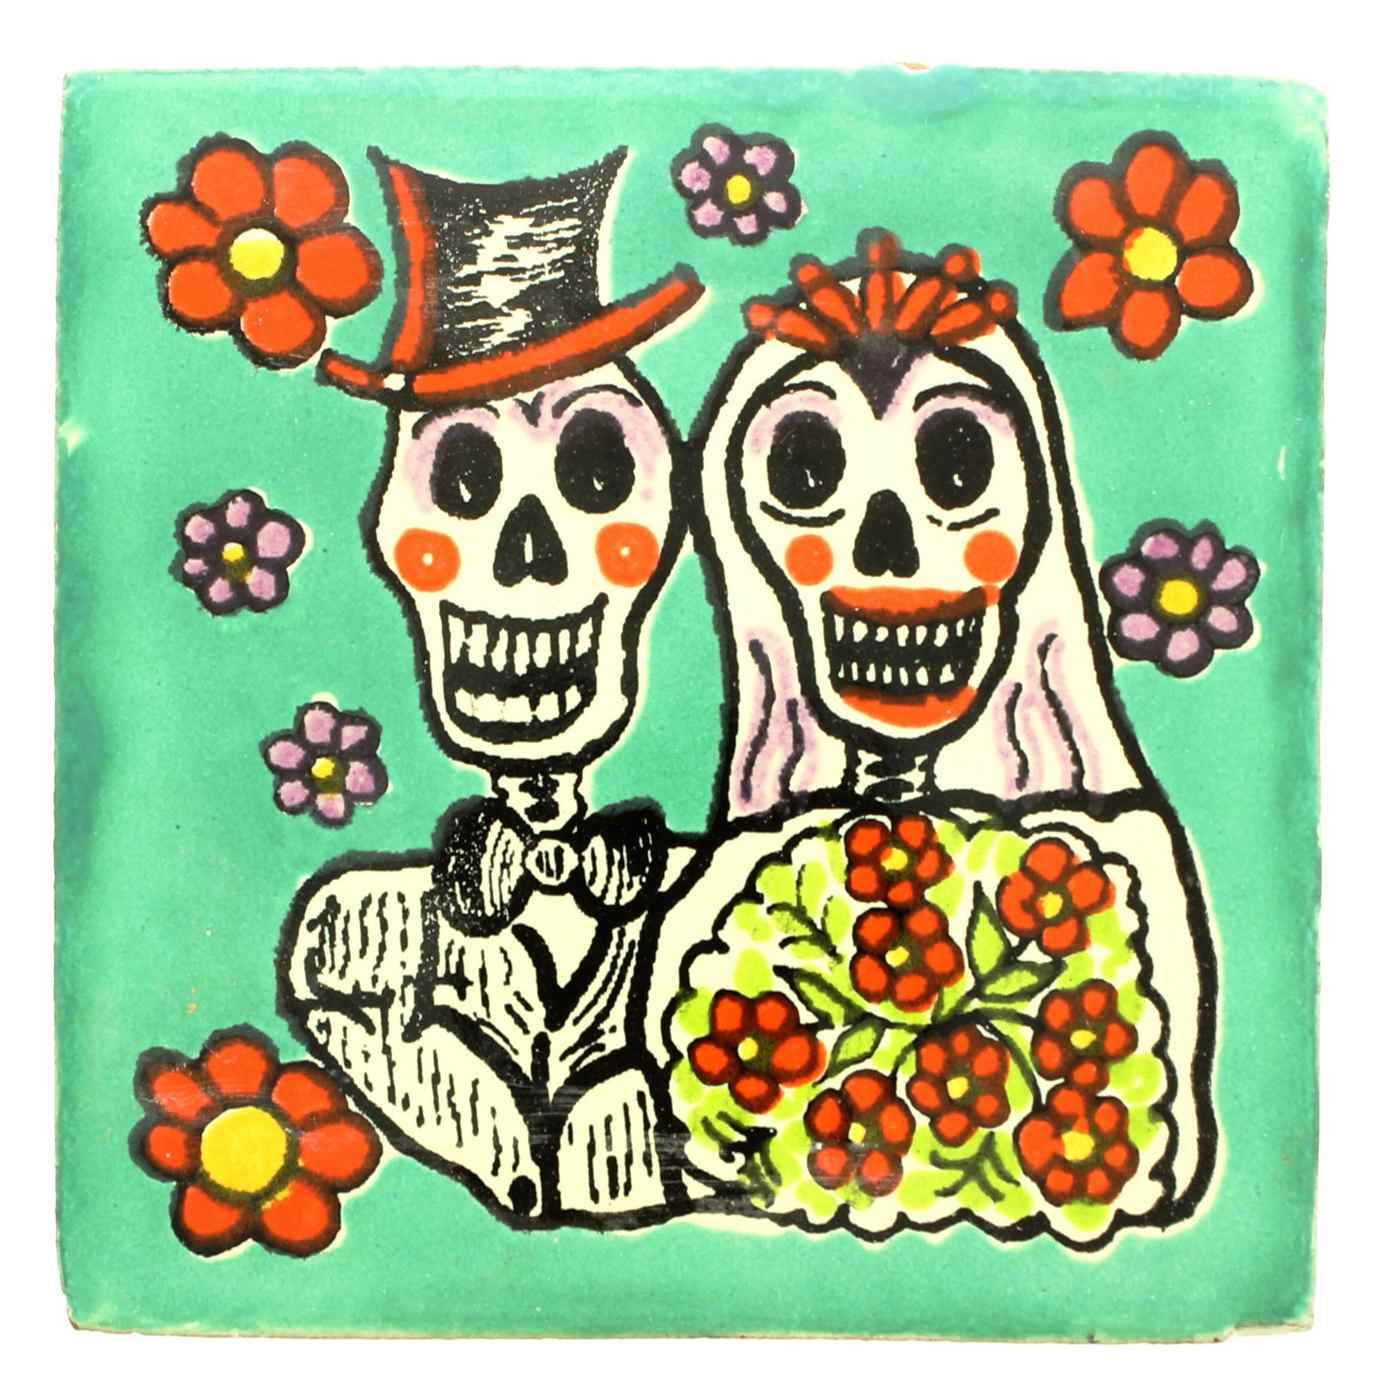 Blue Orange Pottery Day of the Dead 4" x 4" Decorative Tiles, Assorted Colors & Designs; image 3 of 5